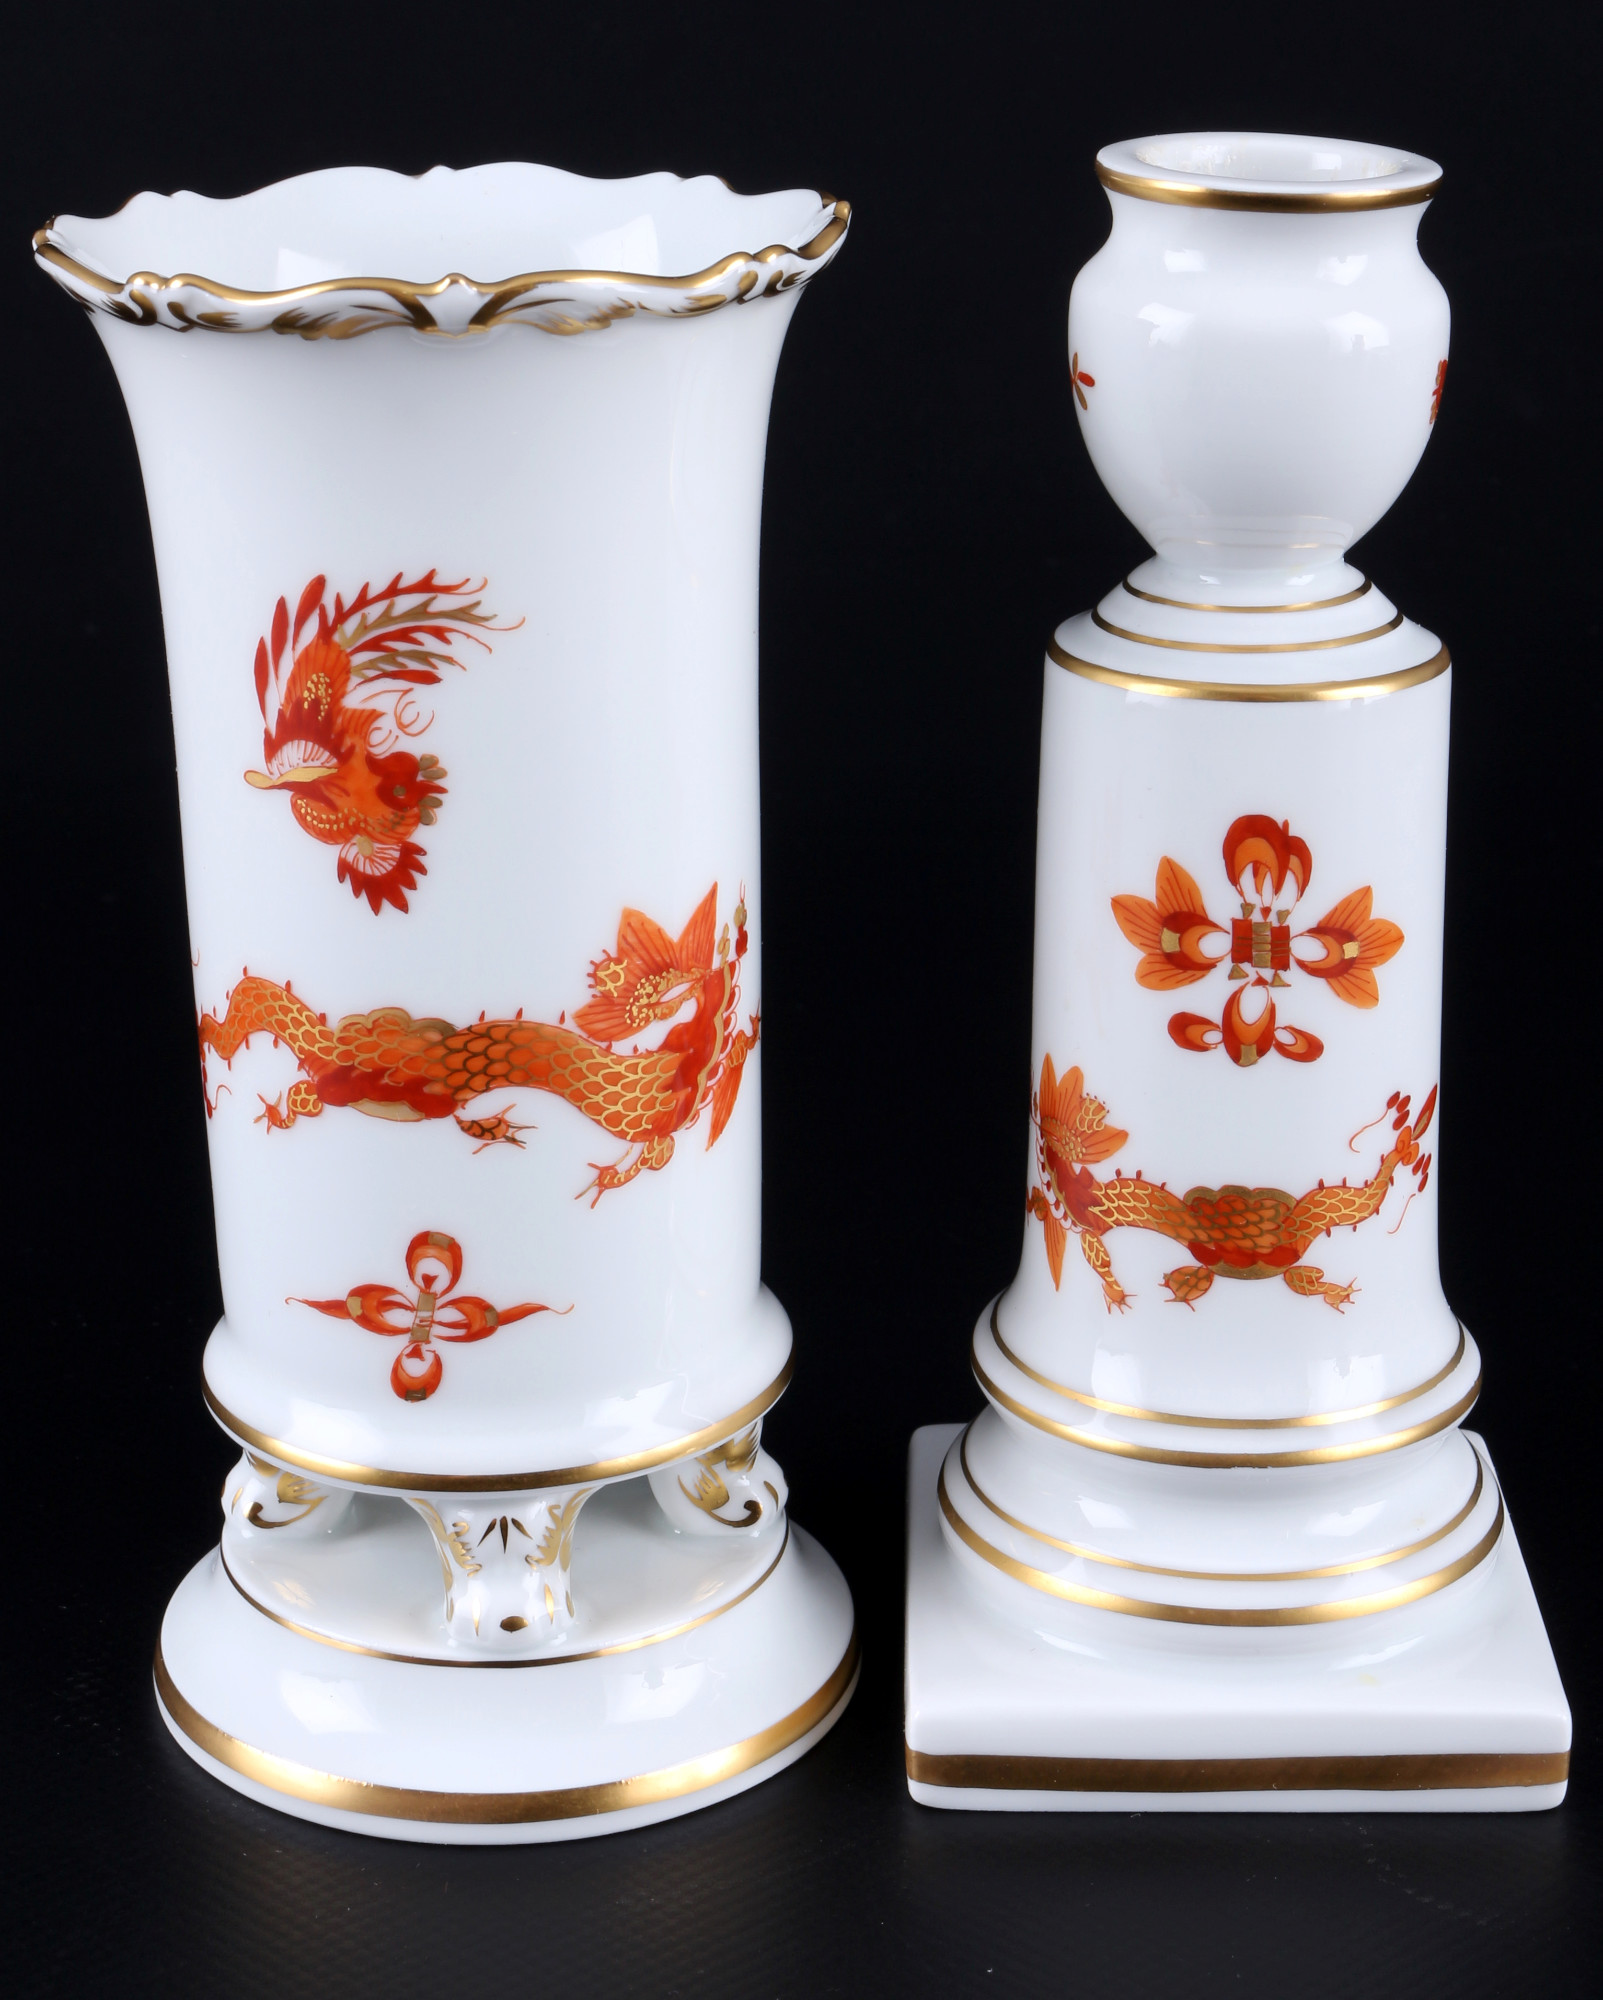 Meissen Red Court Dragon coffee service for 6 persons 1st choice, Kaffeeservice für 6 Personen 1.Wah - Image 5 of 10